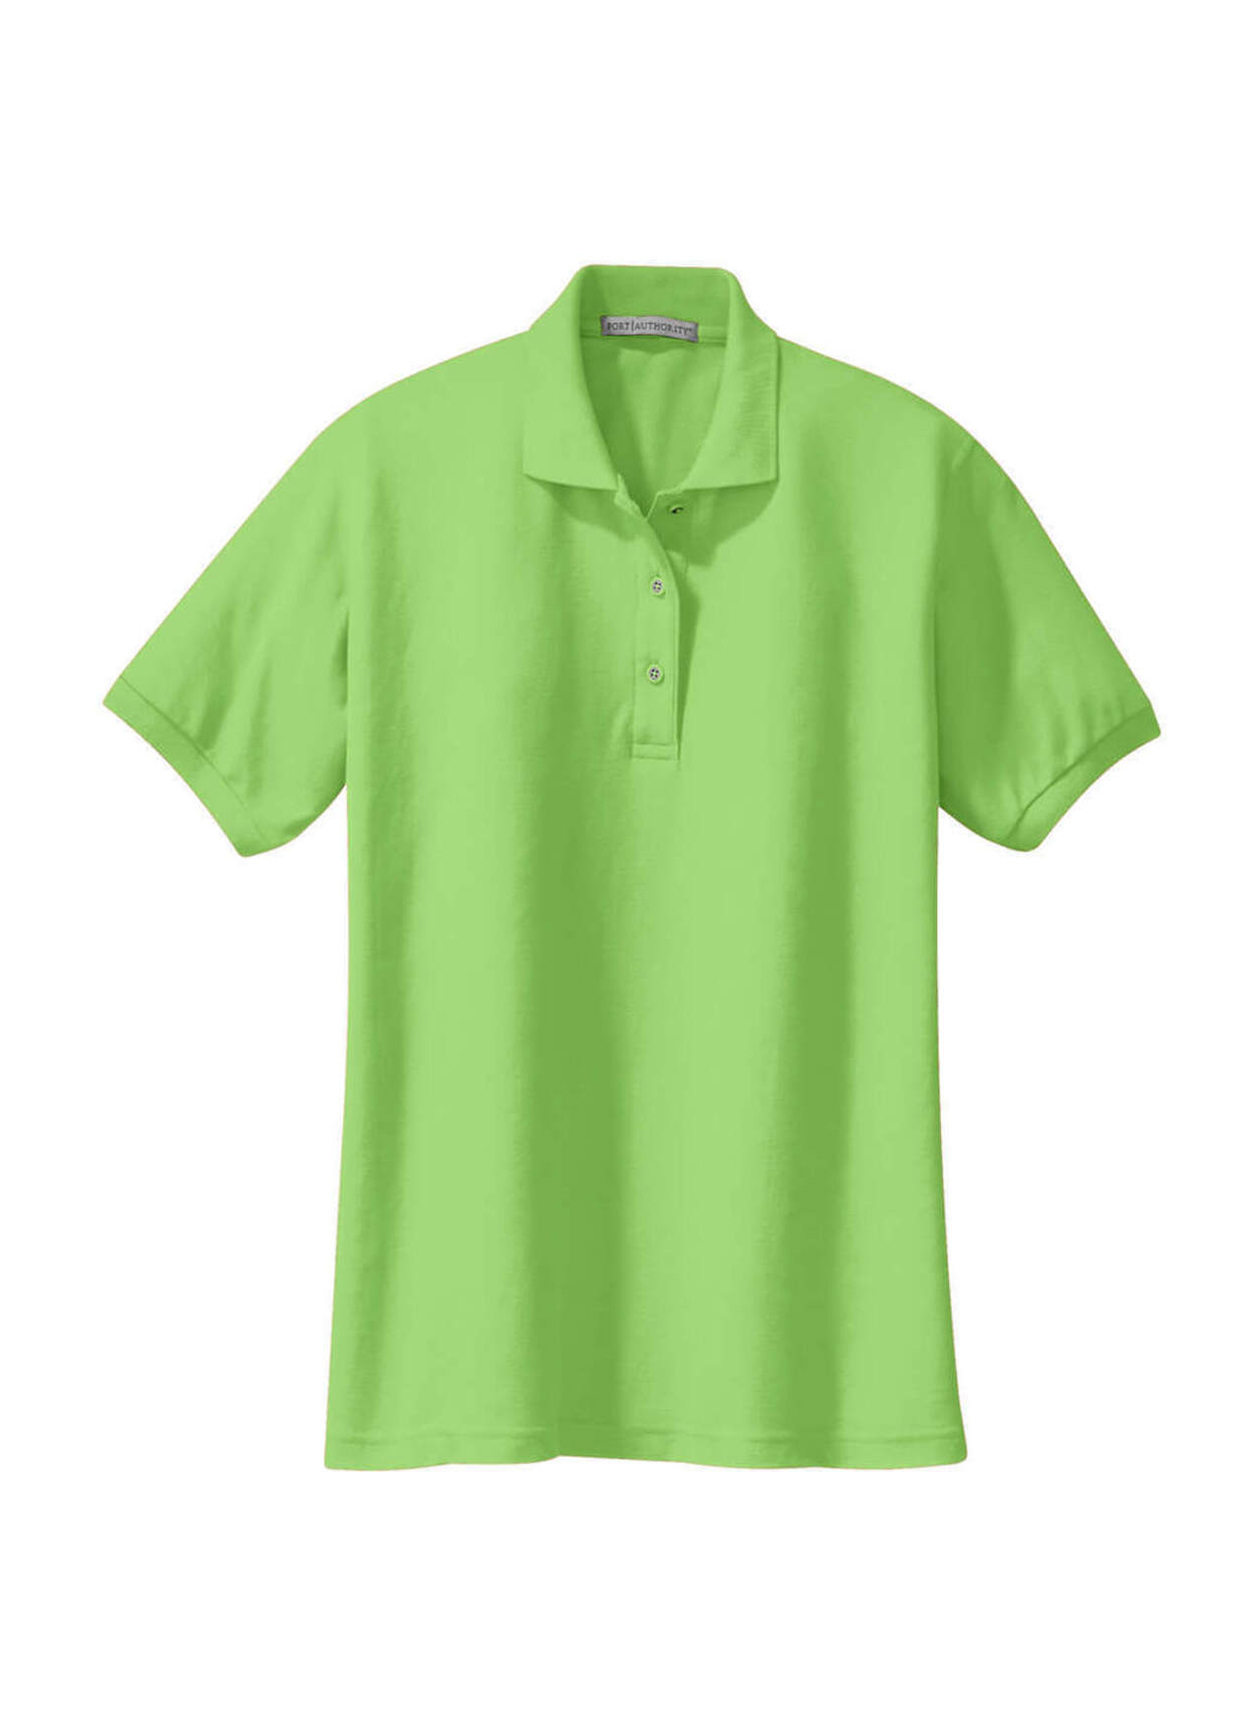 Port Authority Women's Lime Silk Touch Polo